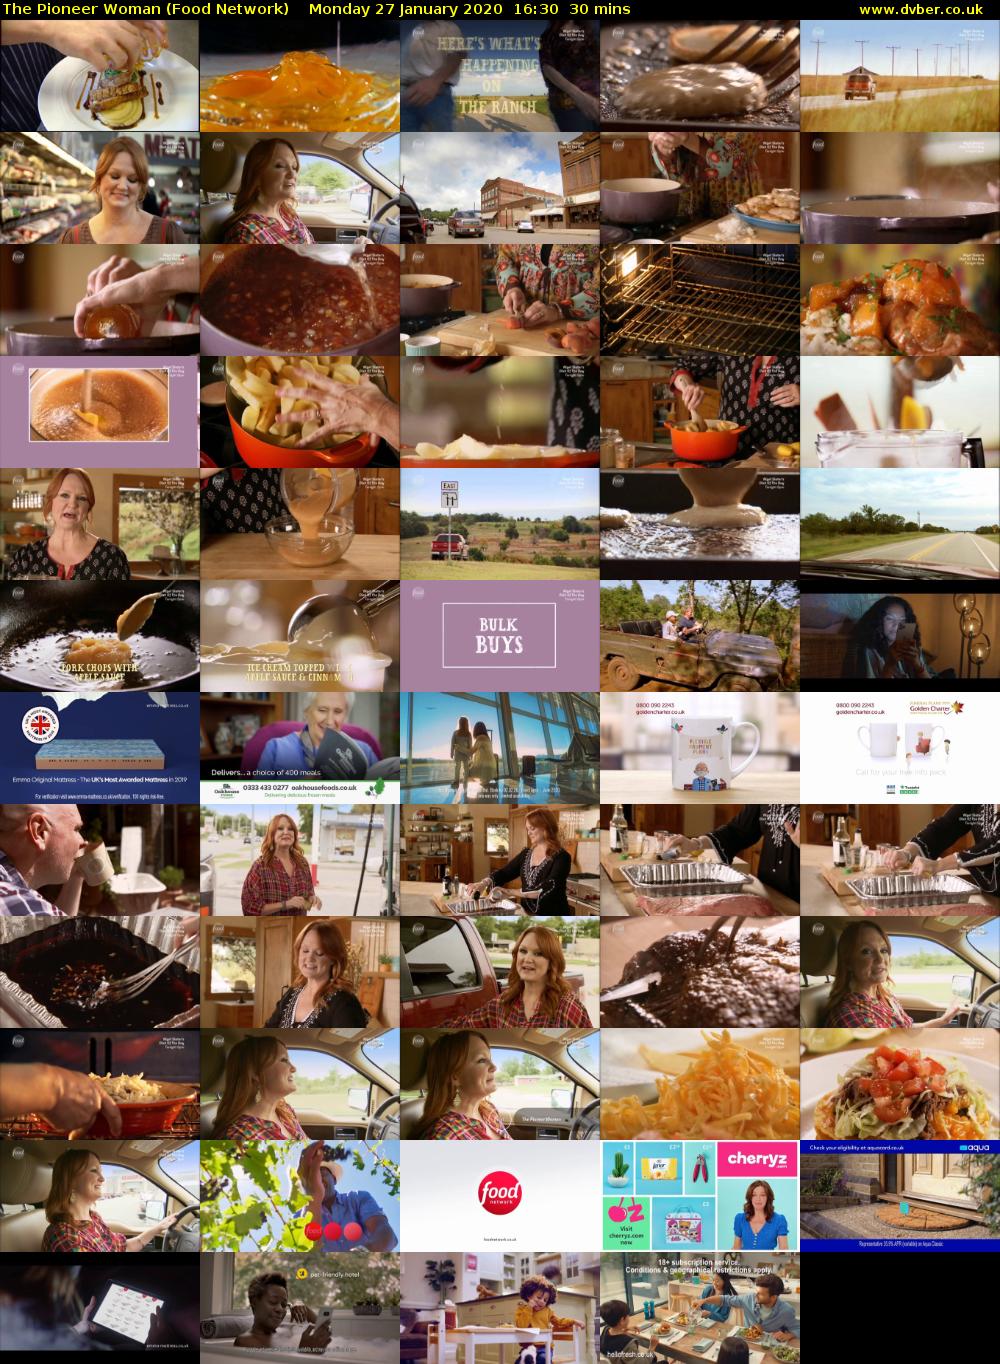 The Pioneer Woman (Food Network) Monday 27 January 2020 16:30 - 17:00